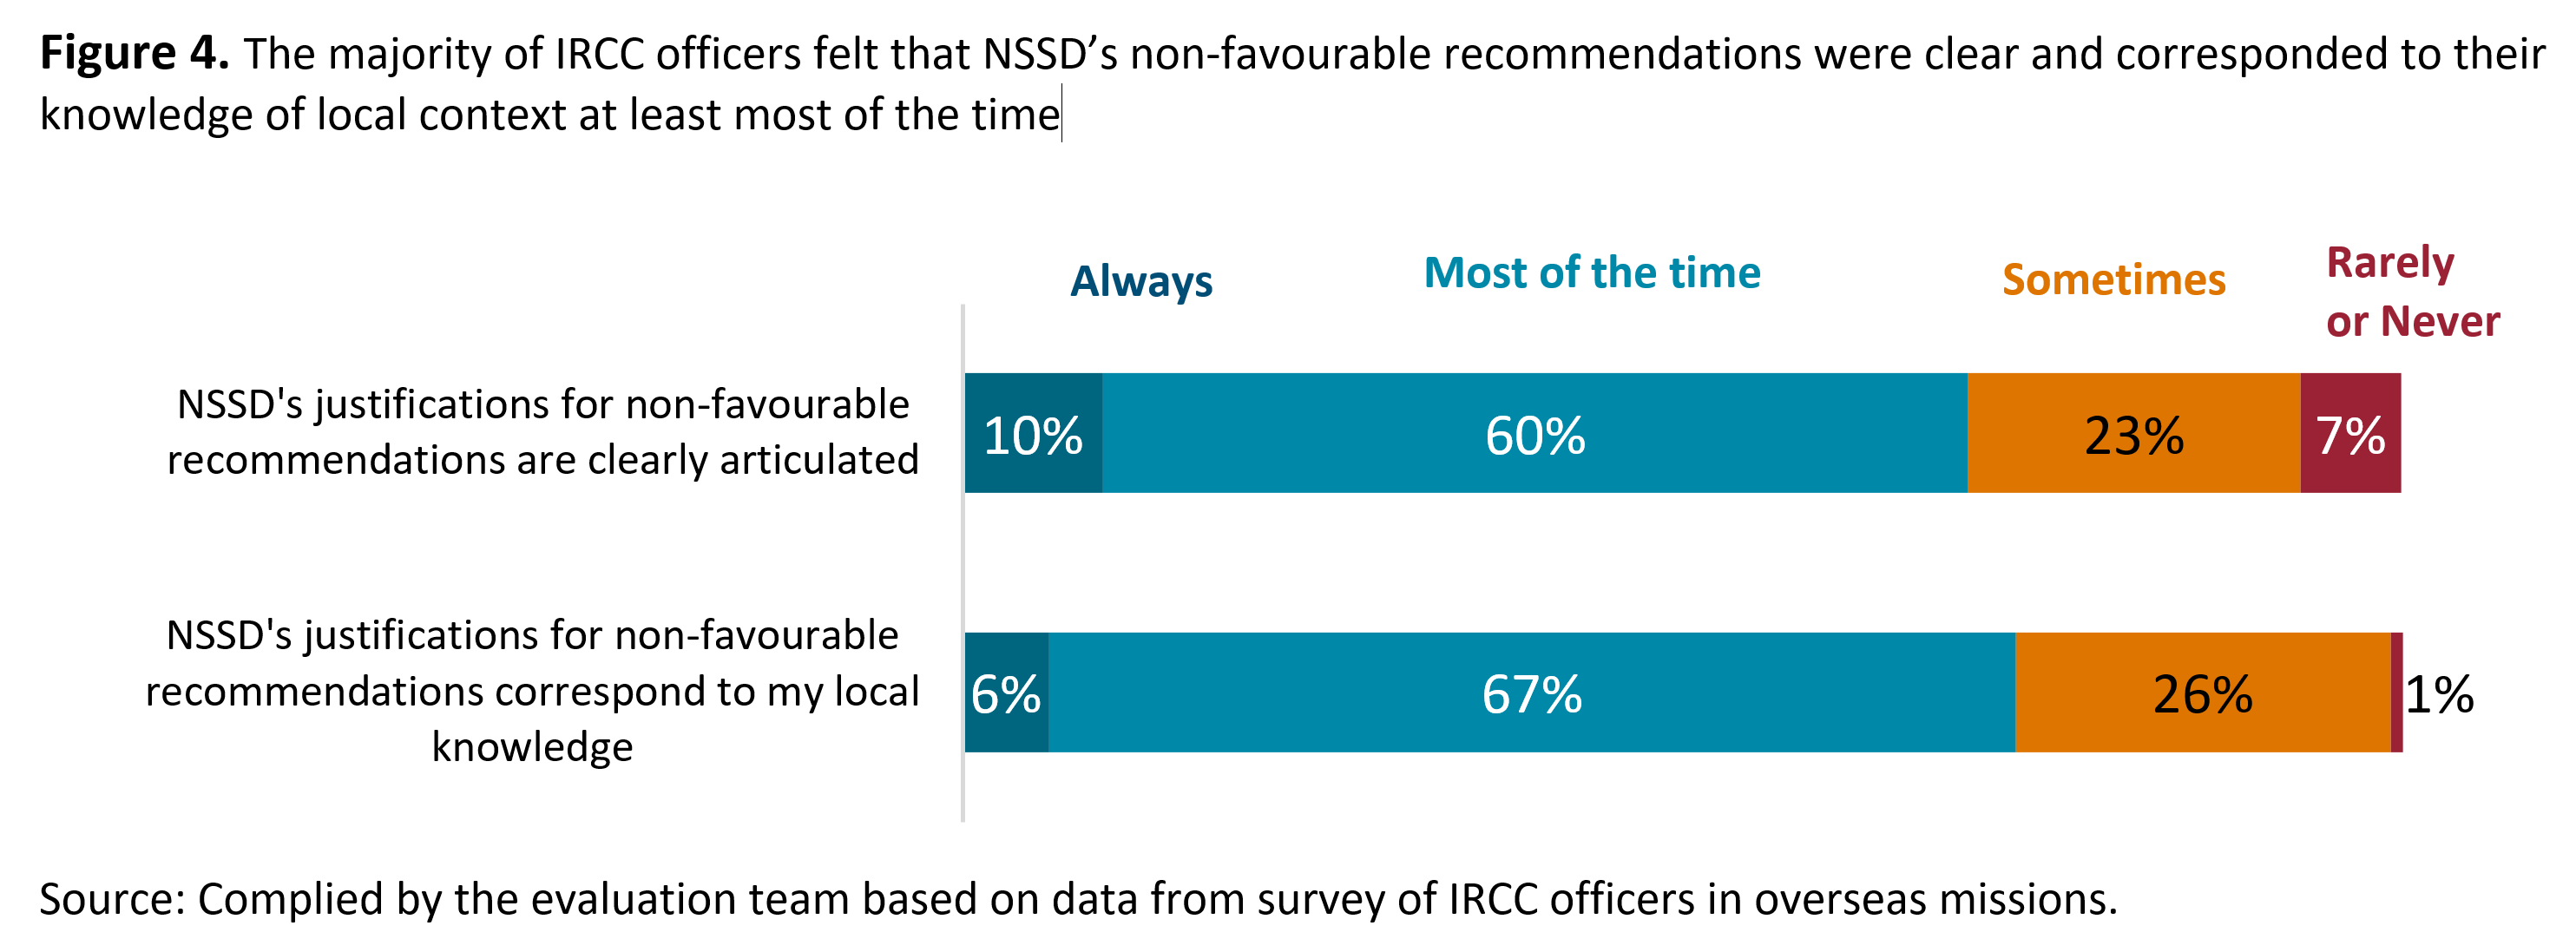 Figure 4 shows that the majority of <abbr>IRCC</abbr> officers felt that <abbr>NSSD</abbr>’s non-favourable recommendations were clear and corresponded to their knowledge of local context at least most of the time.